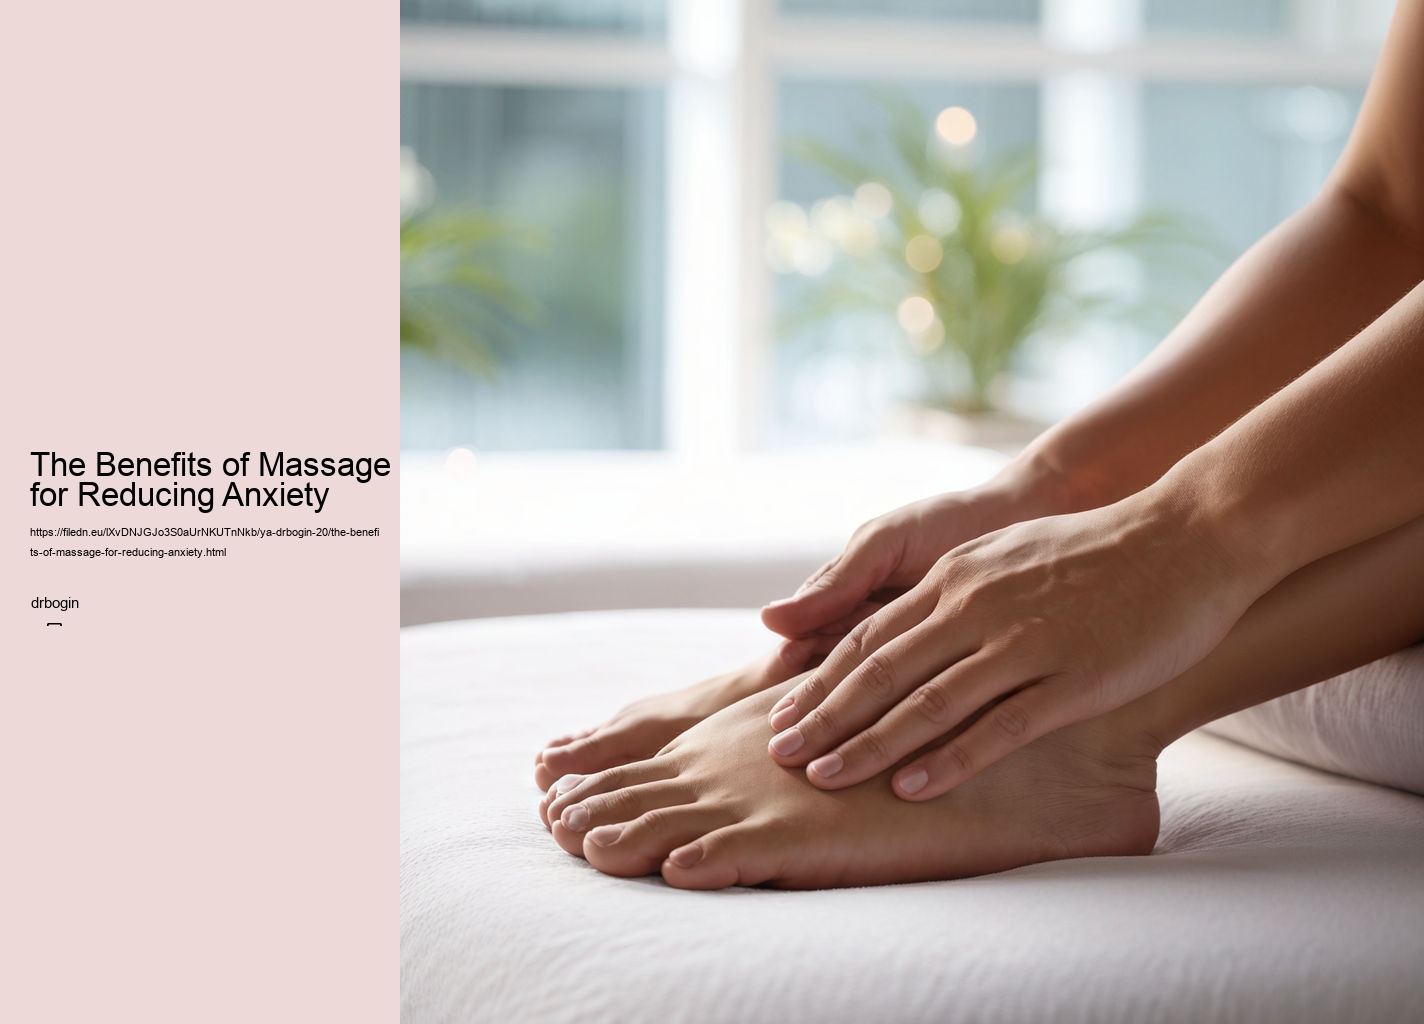 The Benefits of Massage for Reducing Anxiety